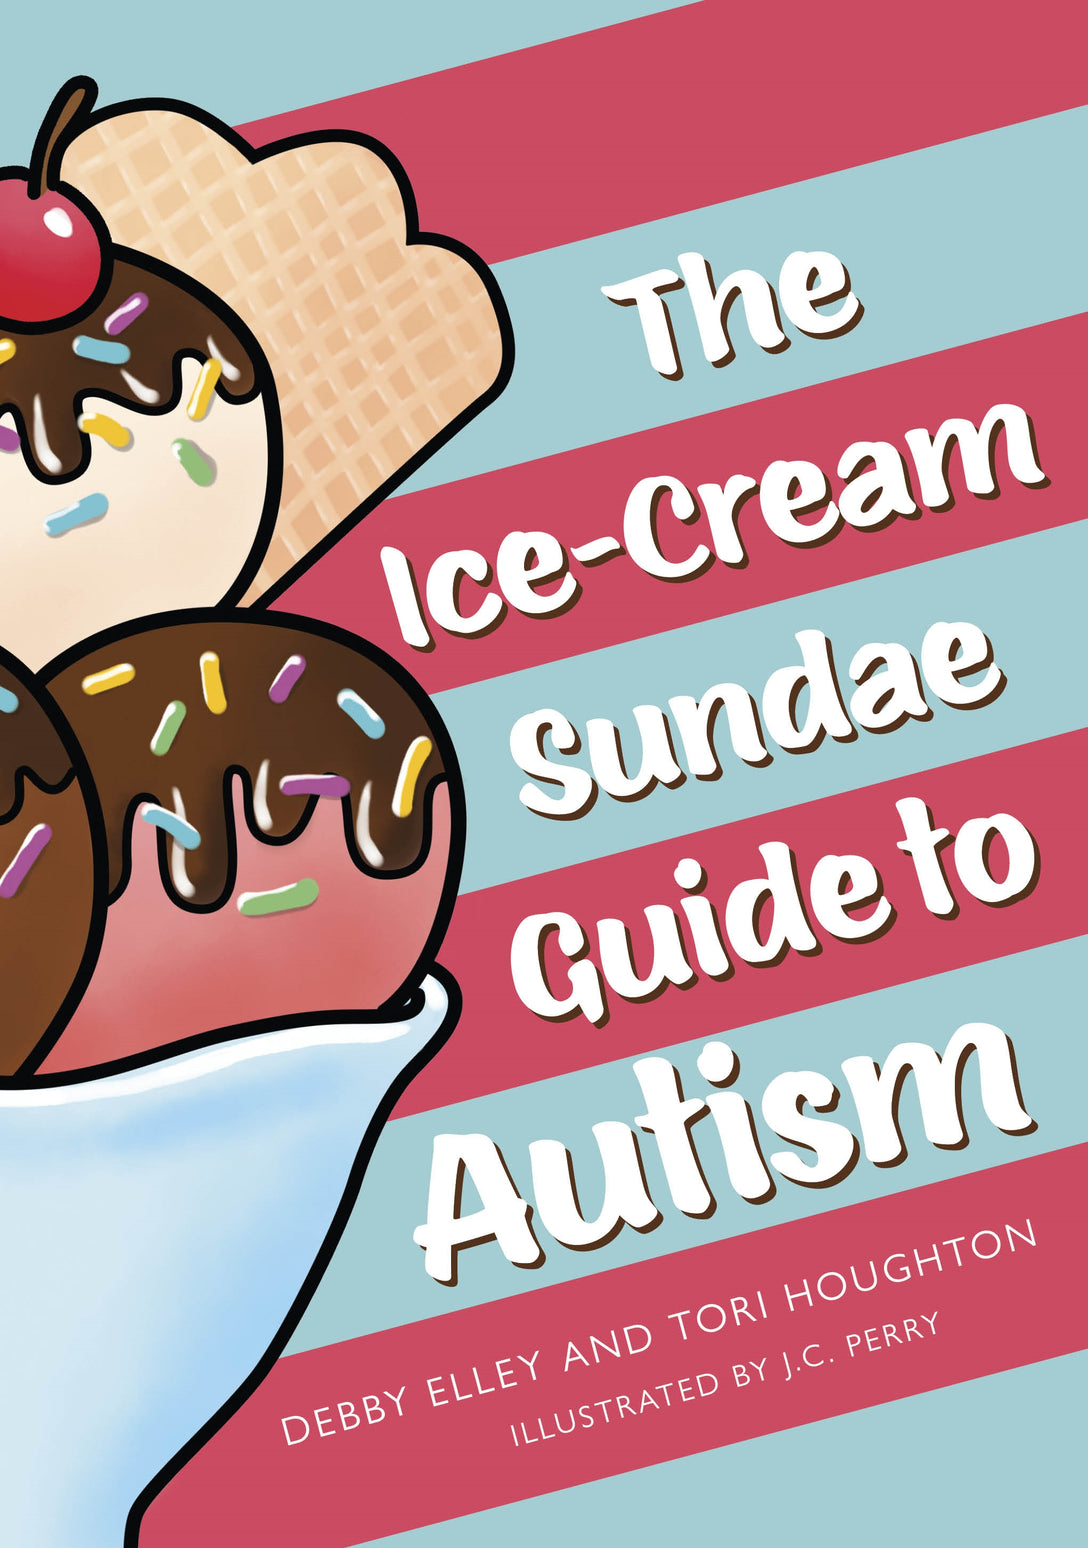 The Ice-Cream Sundae Guide to Autism by J.C. Perry, Debby Elley, Tori Houghton